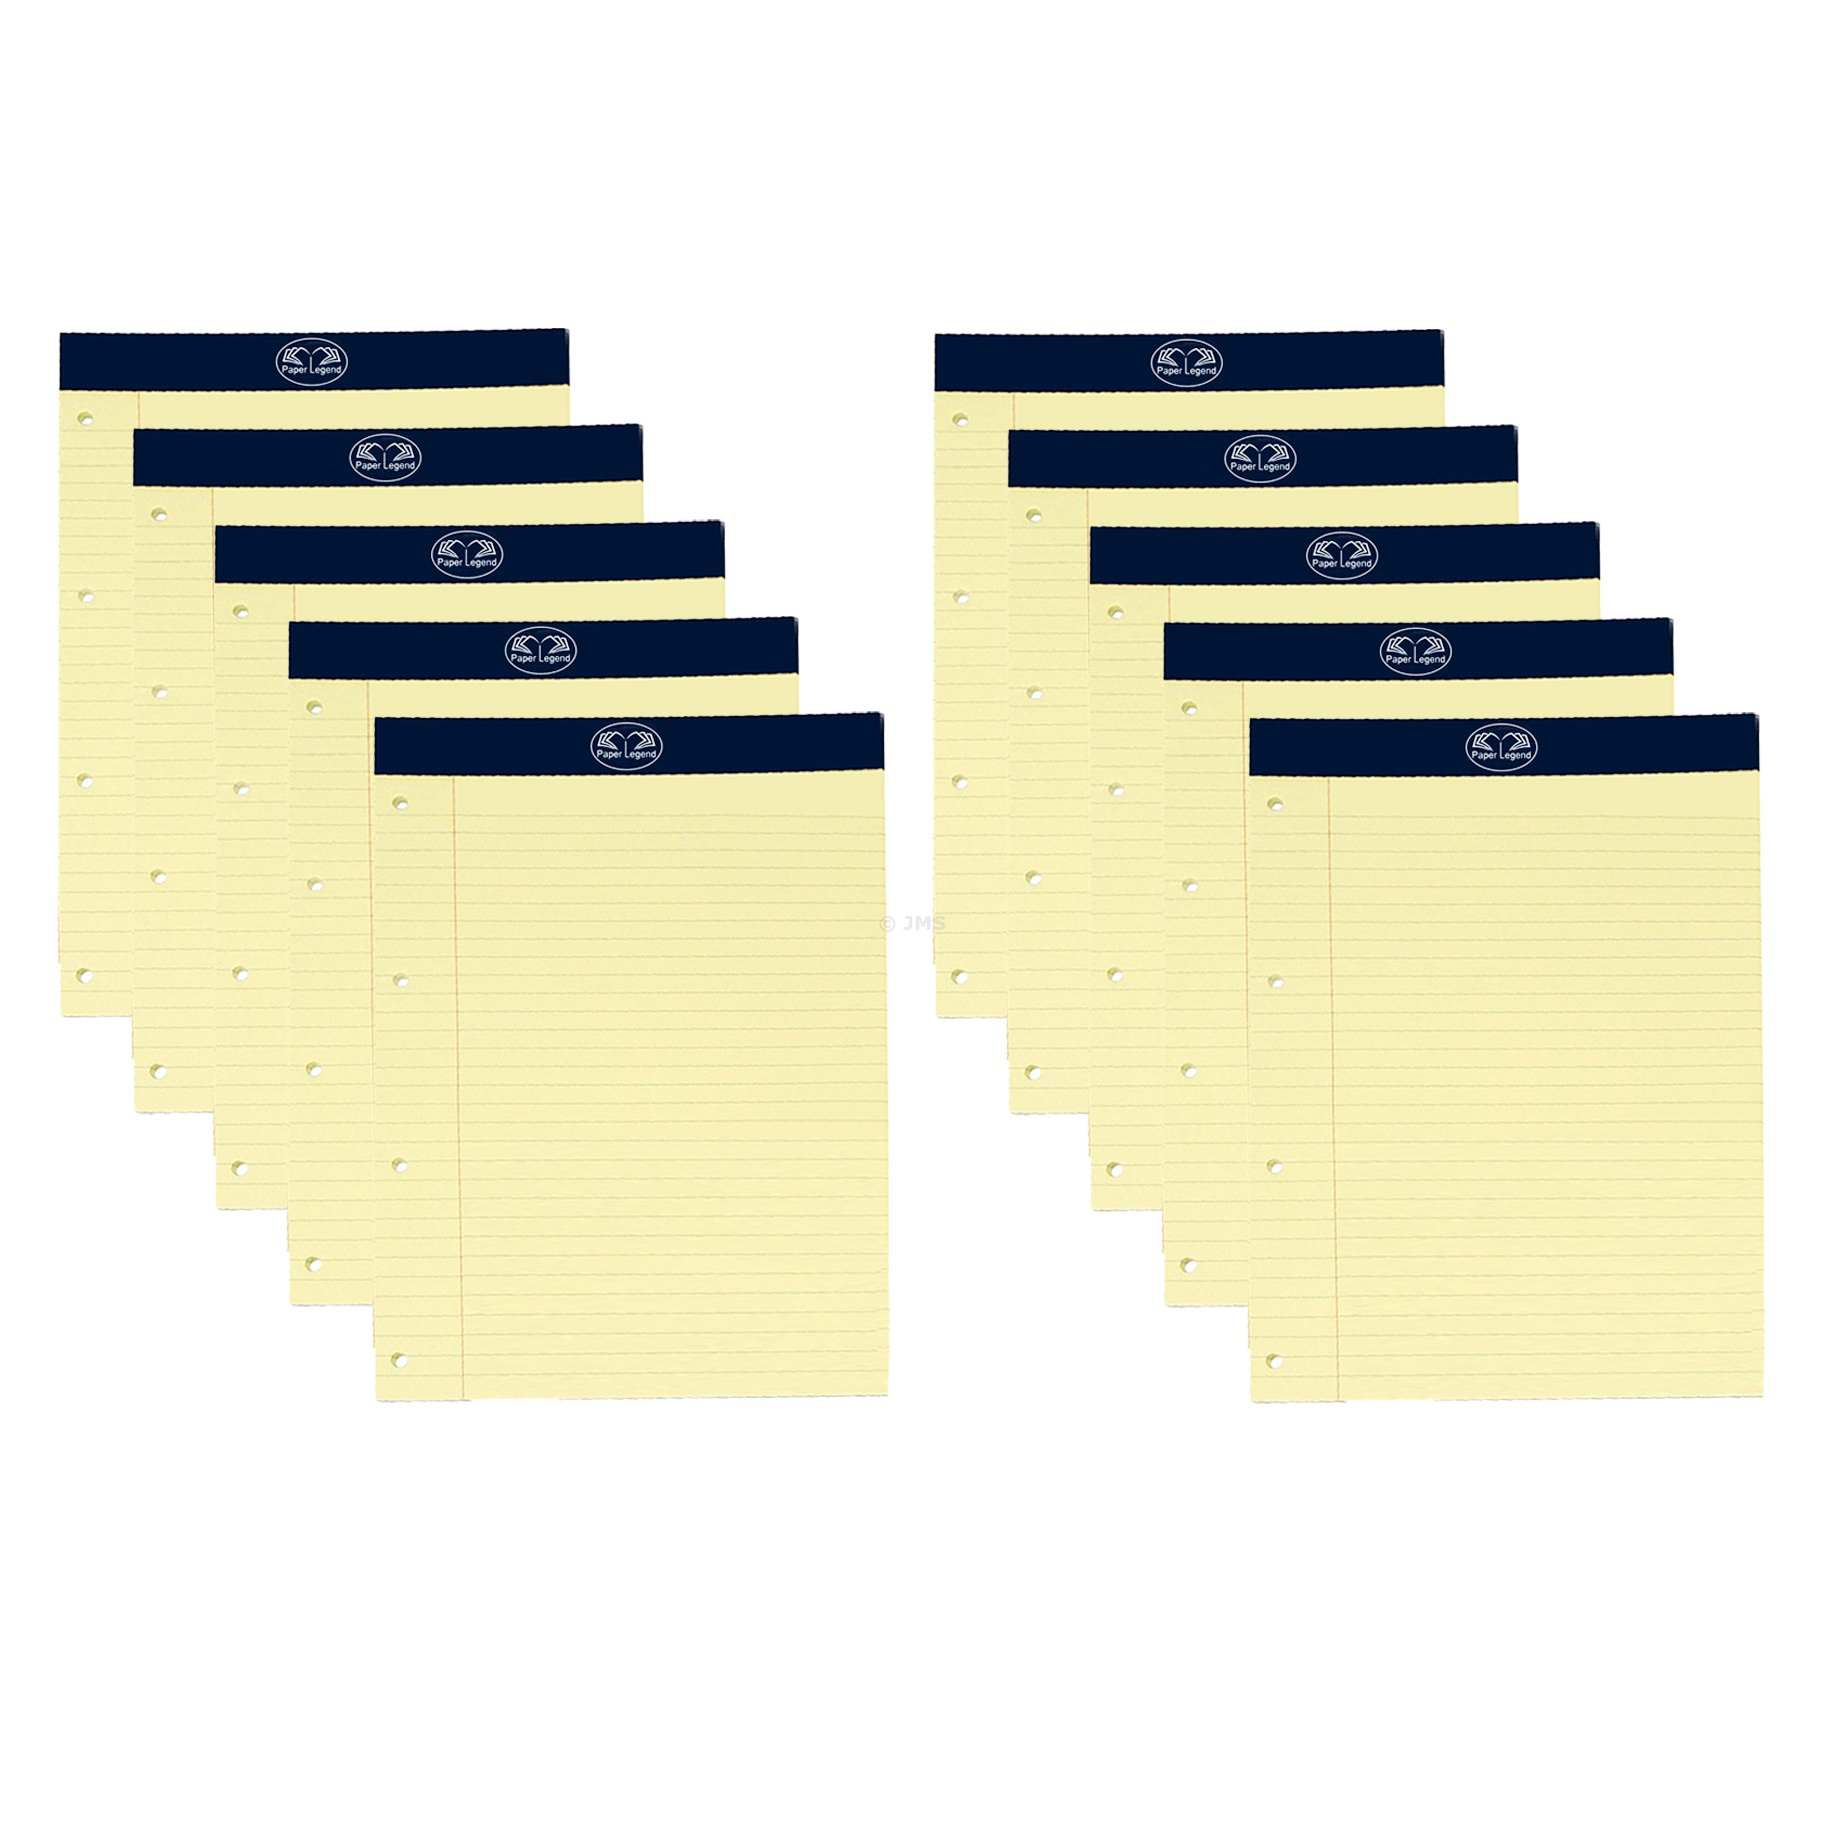 (Set of 10) A4 Yellow Letter Legal Feint Ruled Writing Pads 50 Sheets Perforated Top Head Bound Notepads 80gsm Papers Executive Solutions Visual Memory Aid Memo Refill Notepad